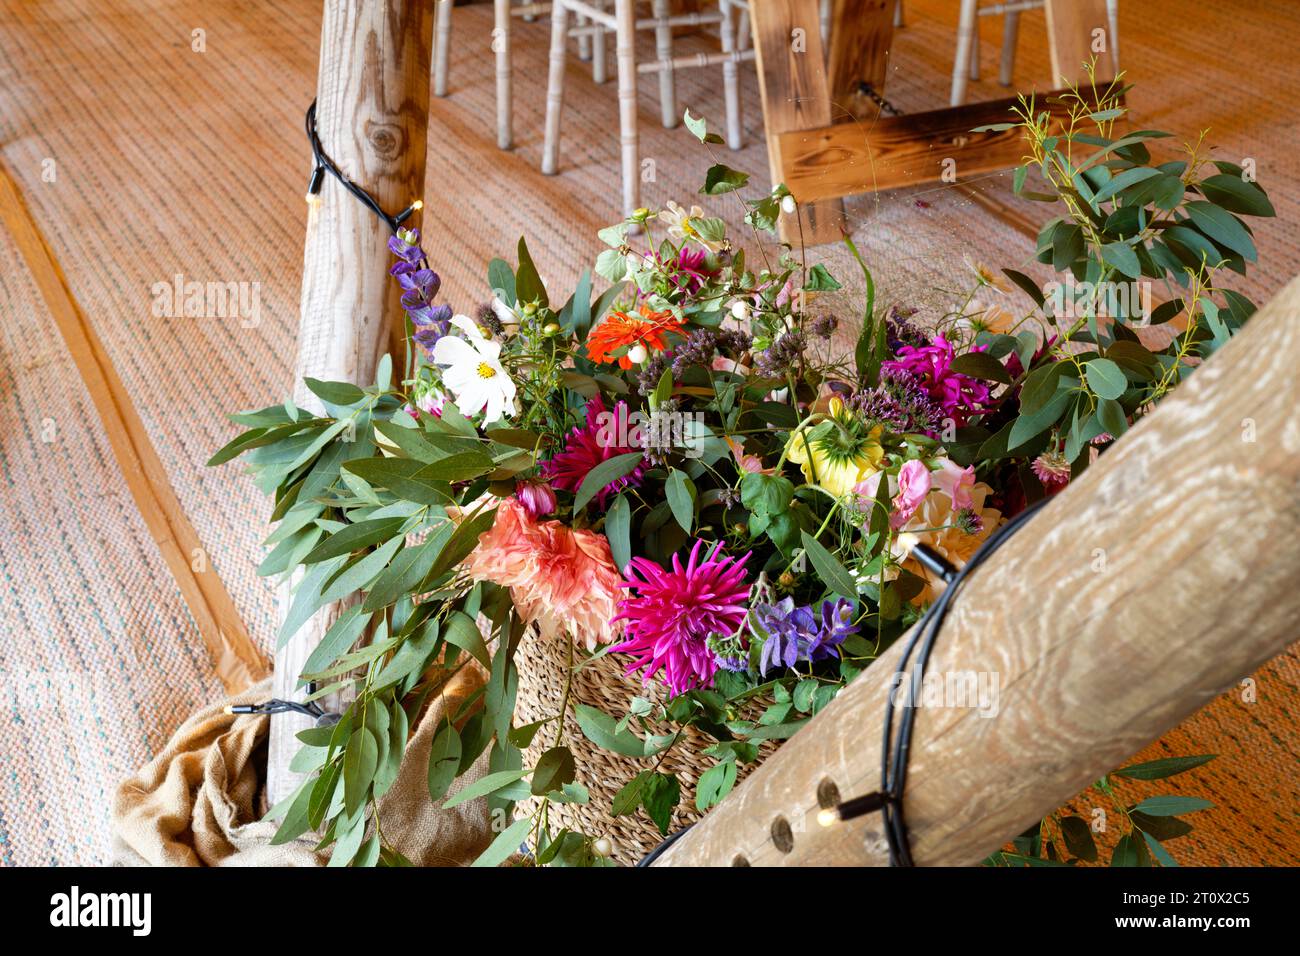 Wedding flowers in a marquee. Tables, chairs, flowers and place settings. A rustic teepee design of tent. Stock Photo